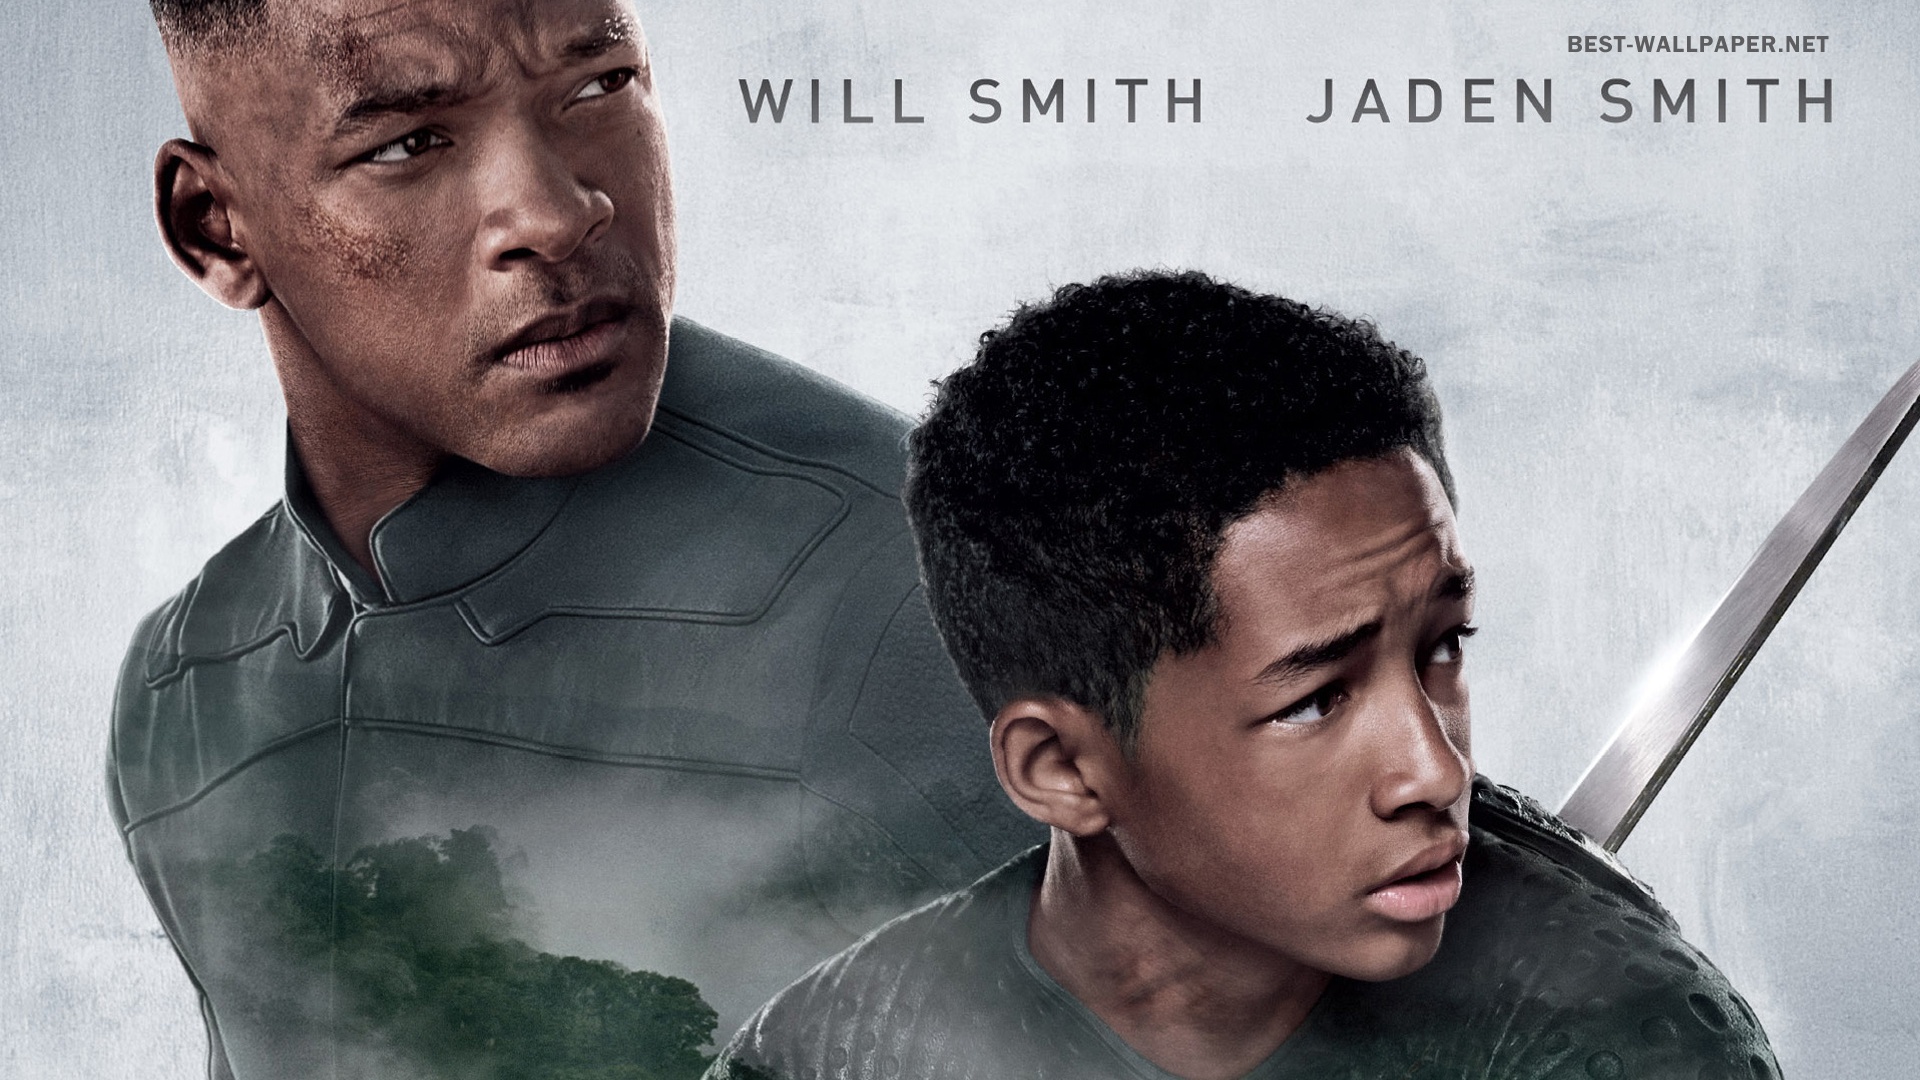 Will Smith With Son In Movie - HD Wallpaper 